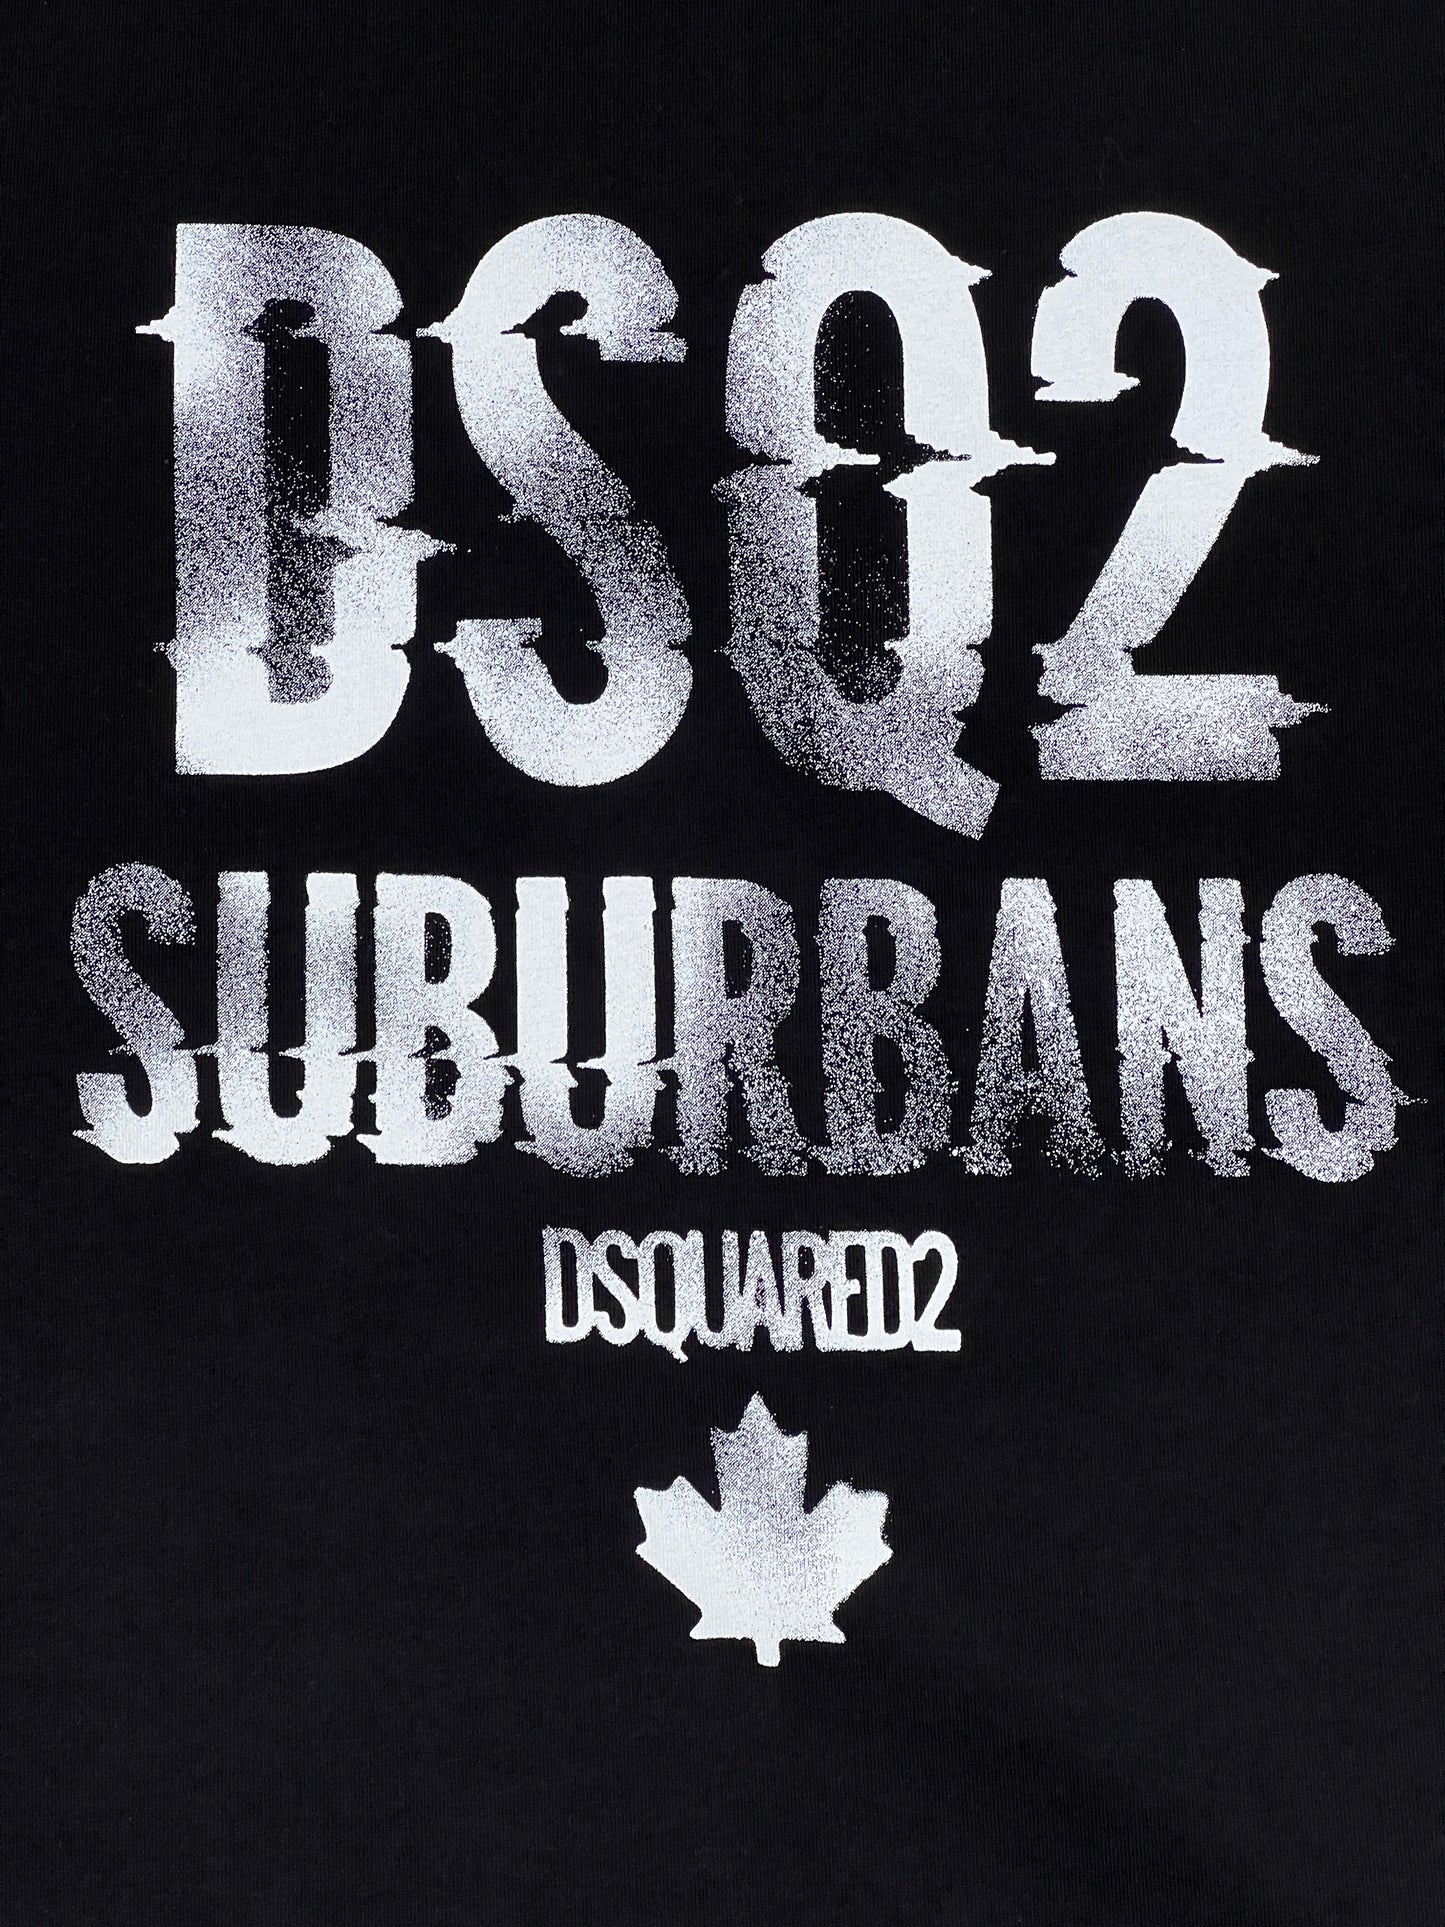 A 100% Cotton DSQUARED2 S74GD1219 Cool Fit T-shirt featuring a graphic print with the text "dsq2 suburbans" and the "Dsquared2" logo with a maple leaf below.